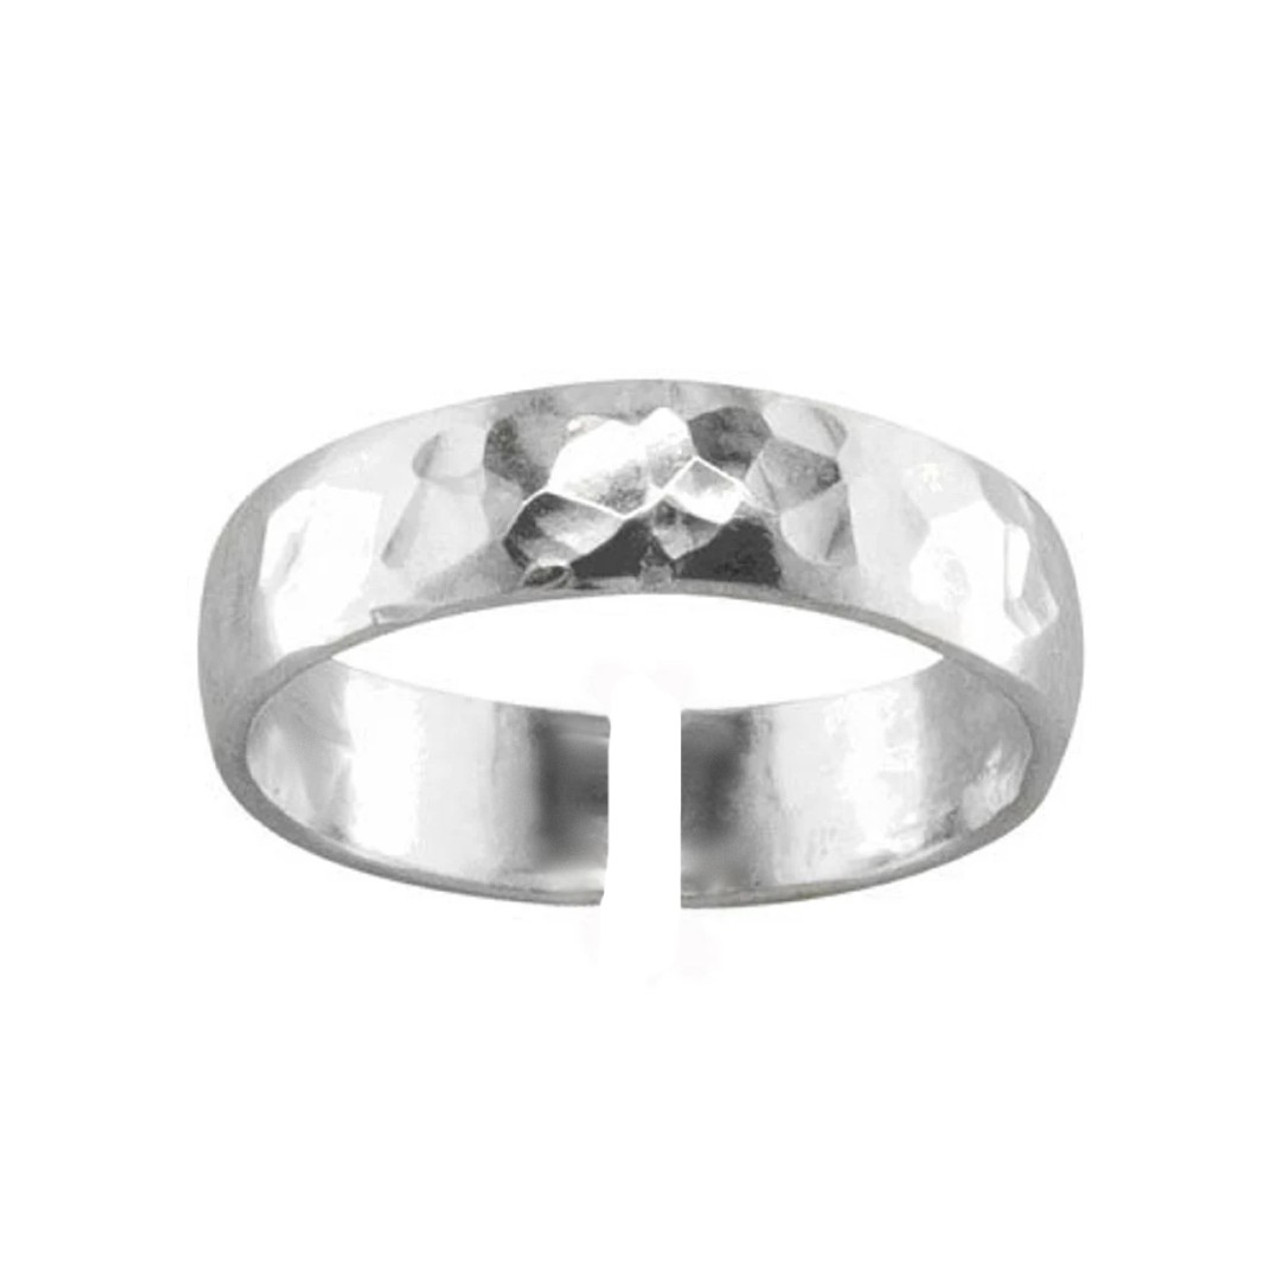 Sterling silver shiny hammered thumb ring